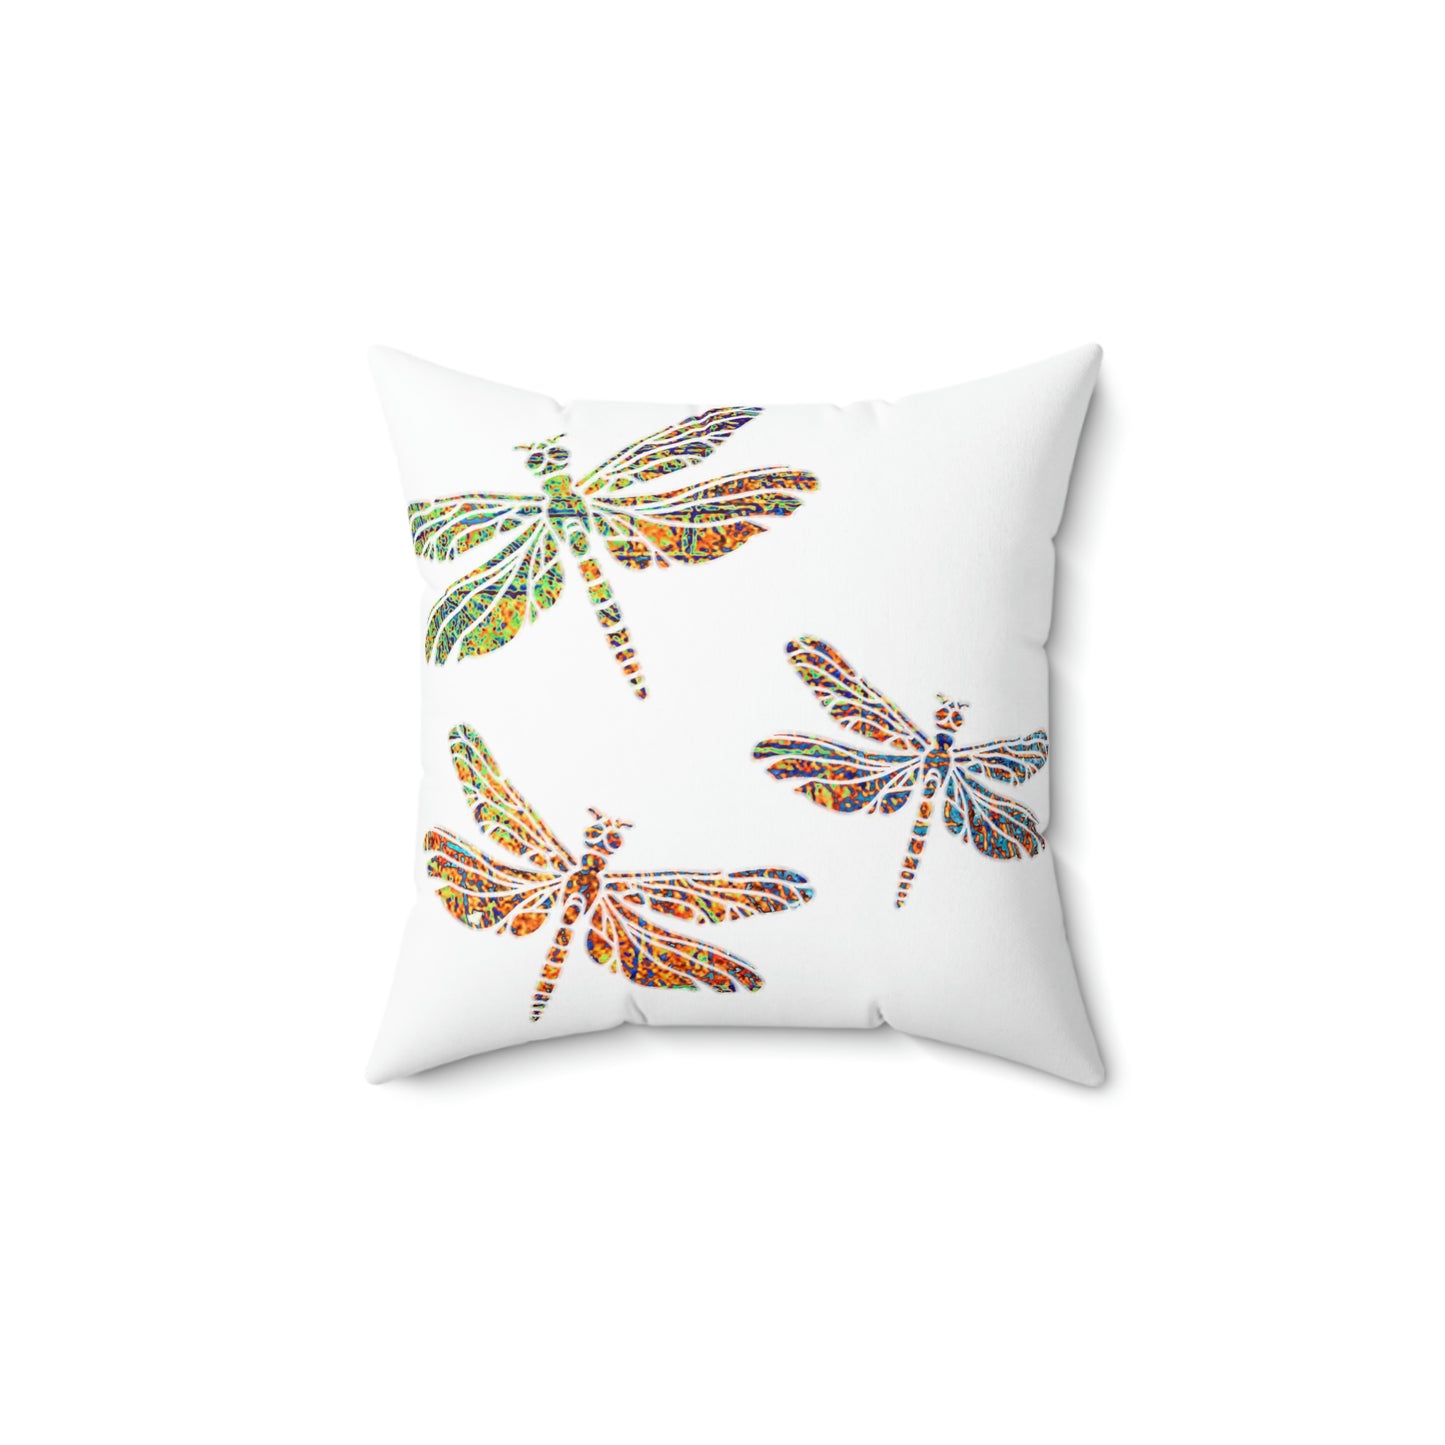 Minimalist square white pillow with 3 colorful Dragonflies print 3 sizes available